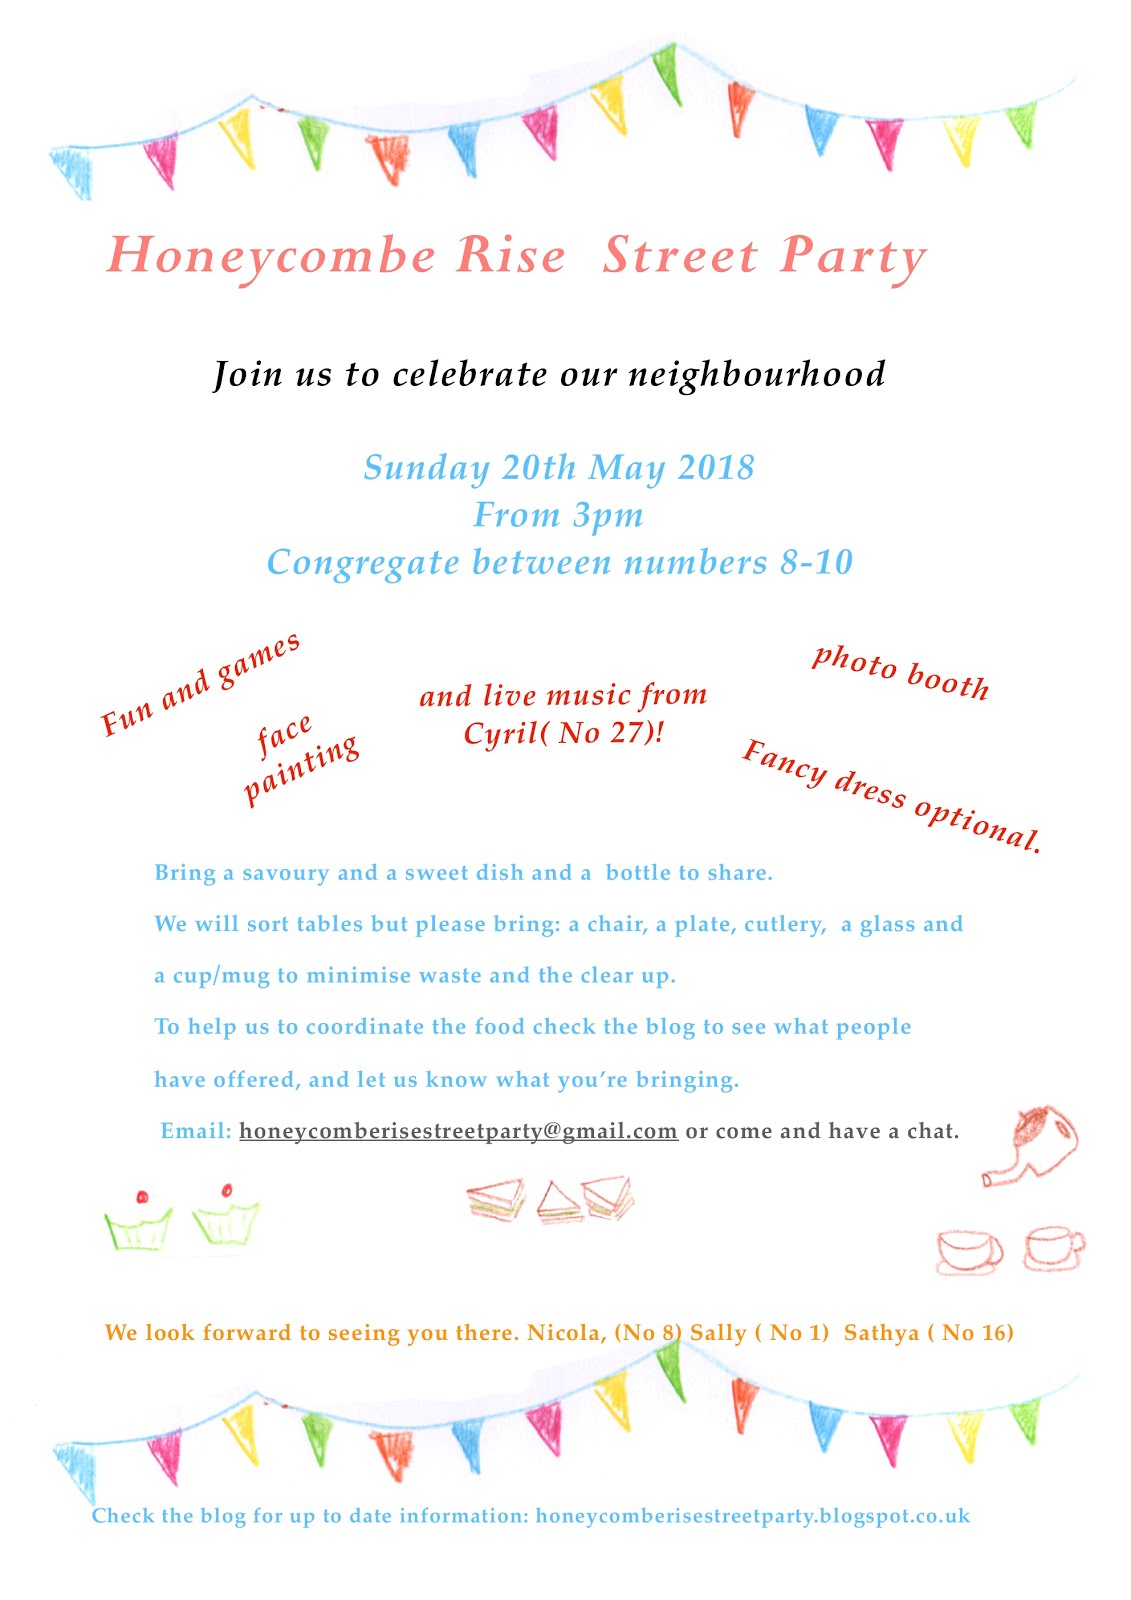 Honeycombe Rise Street Party